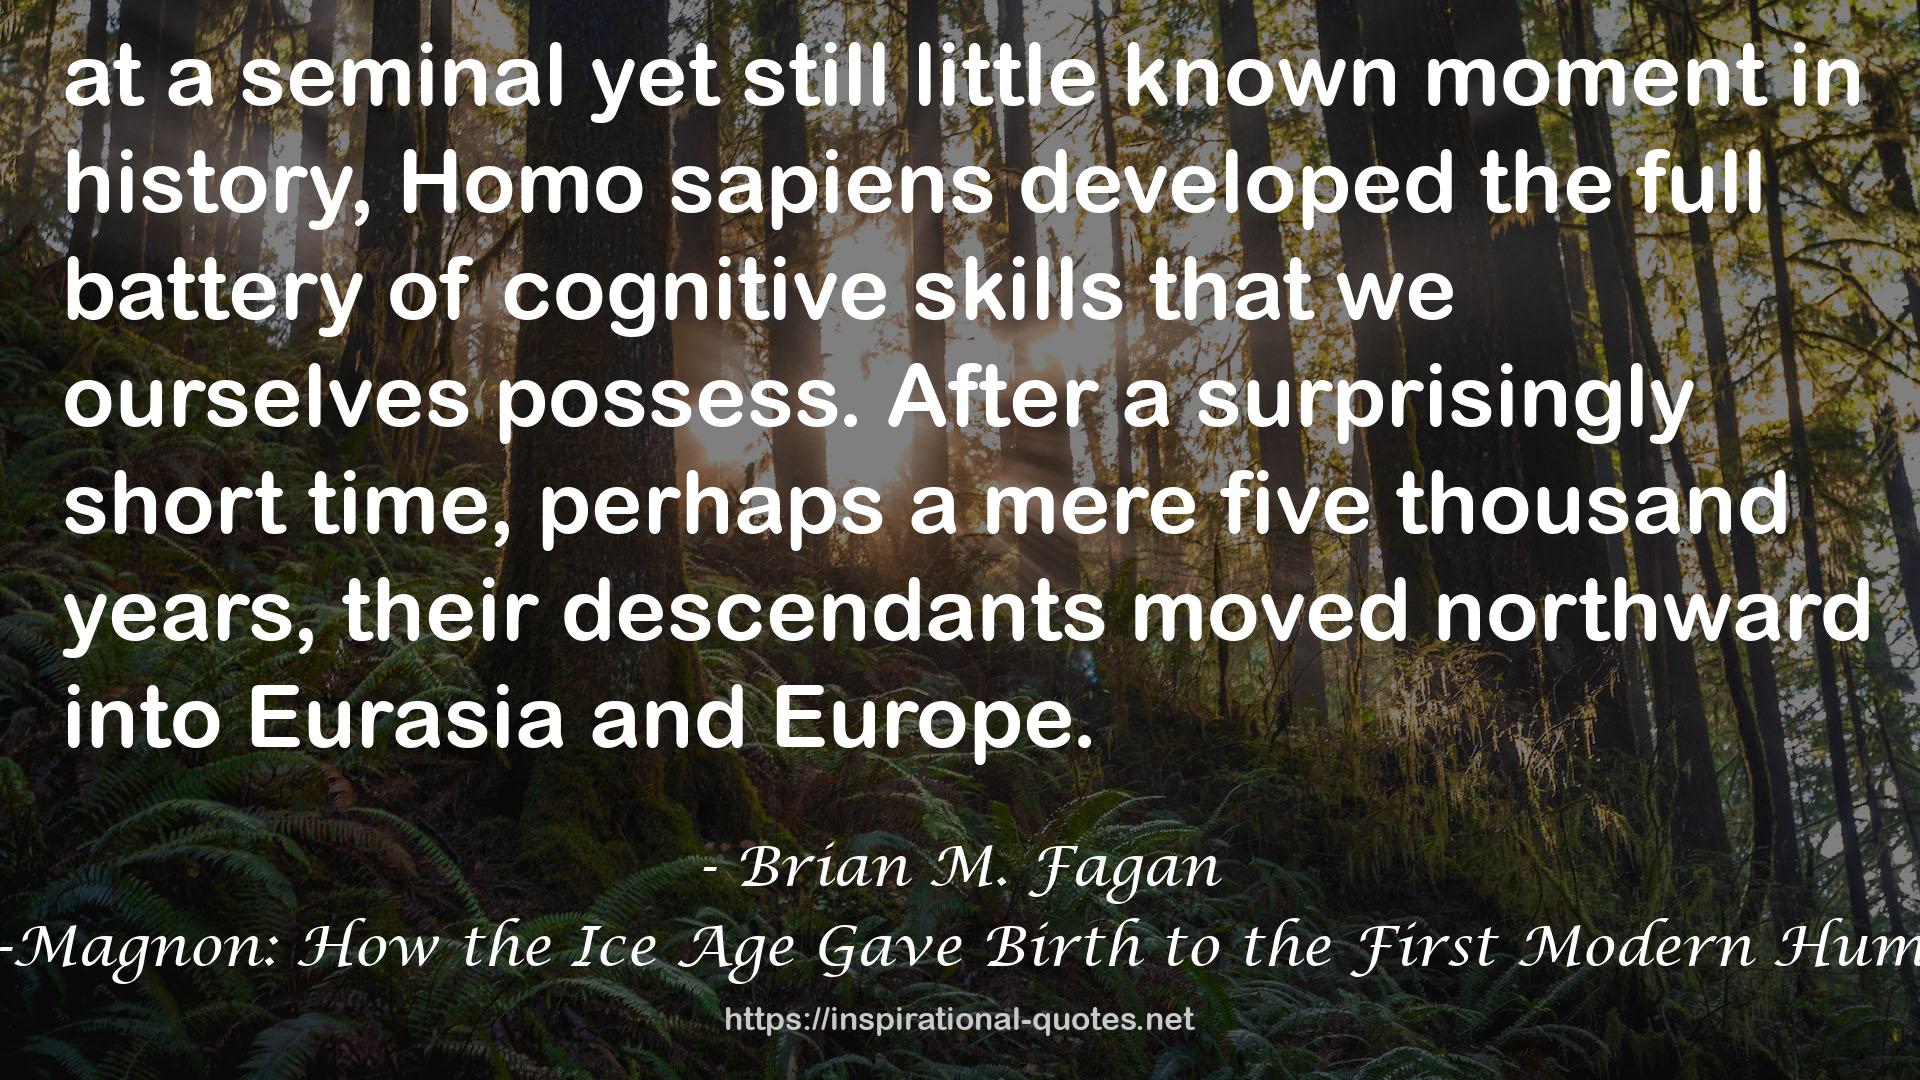 Cro-Magnon: How the Ice Age Gave Birth to the First Modern Humans QUOTES